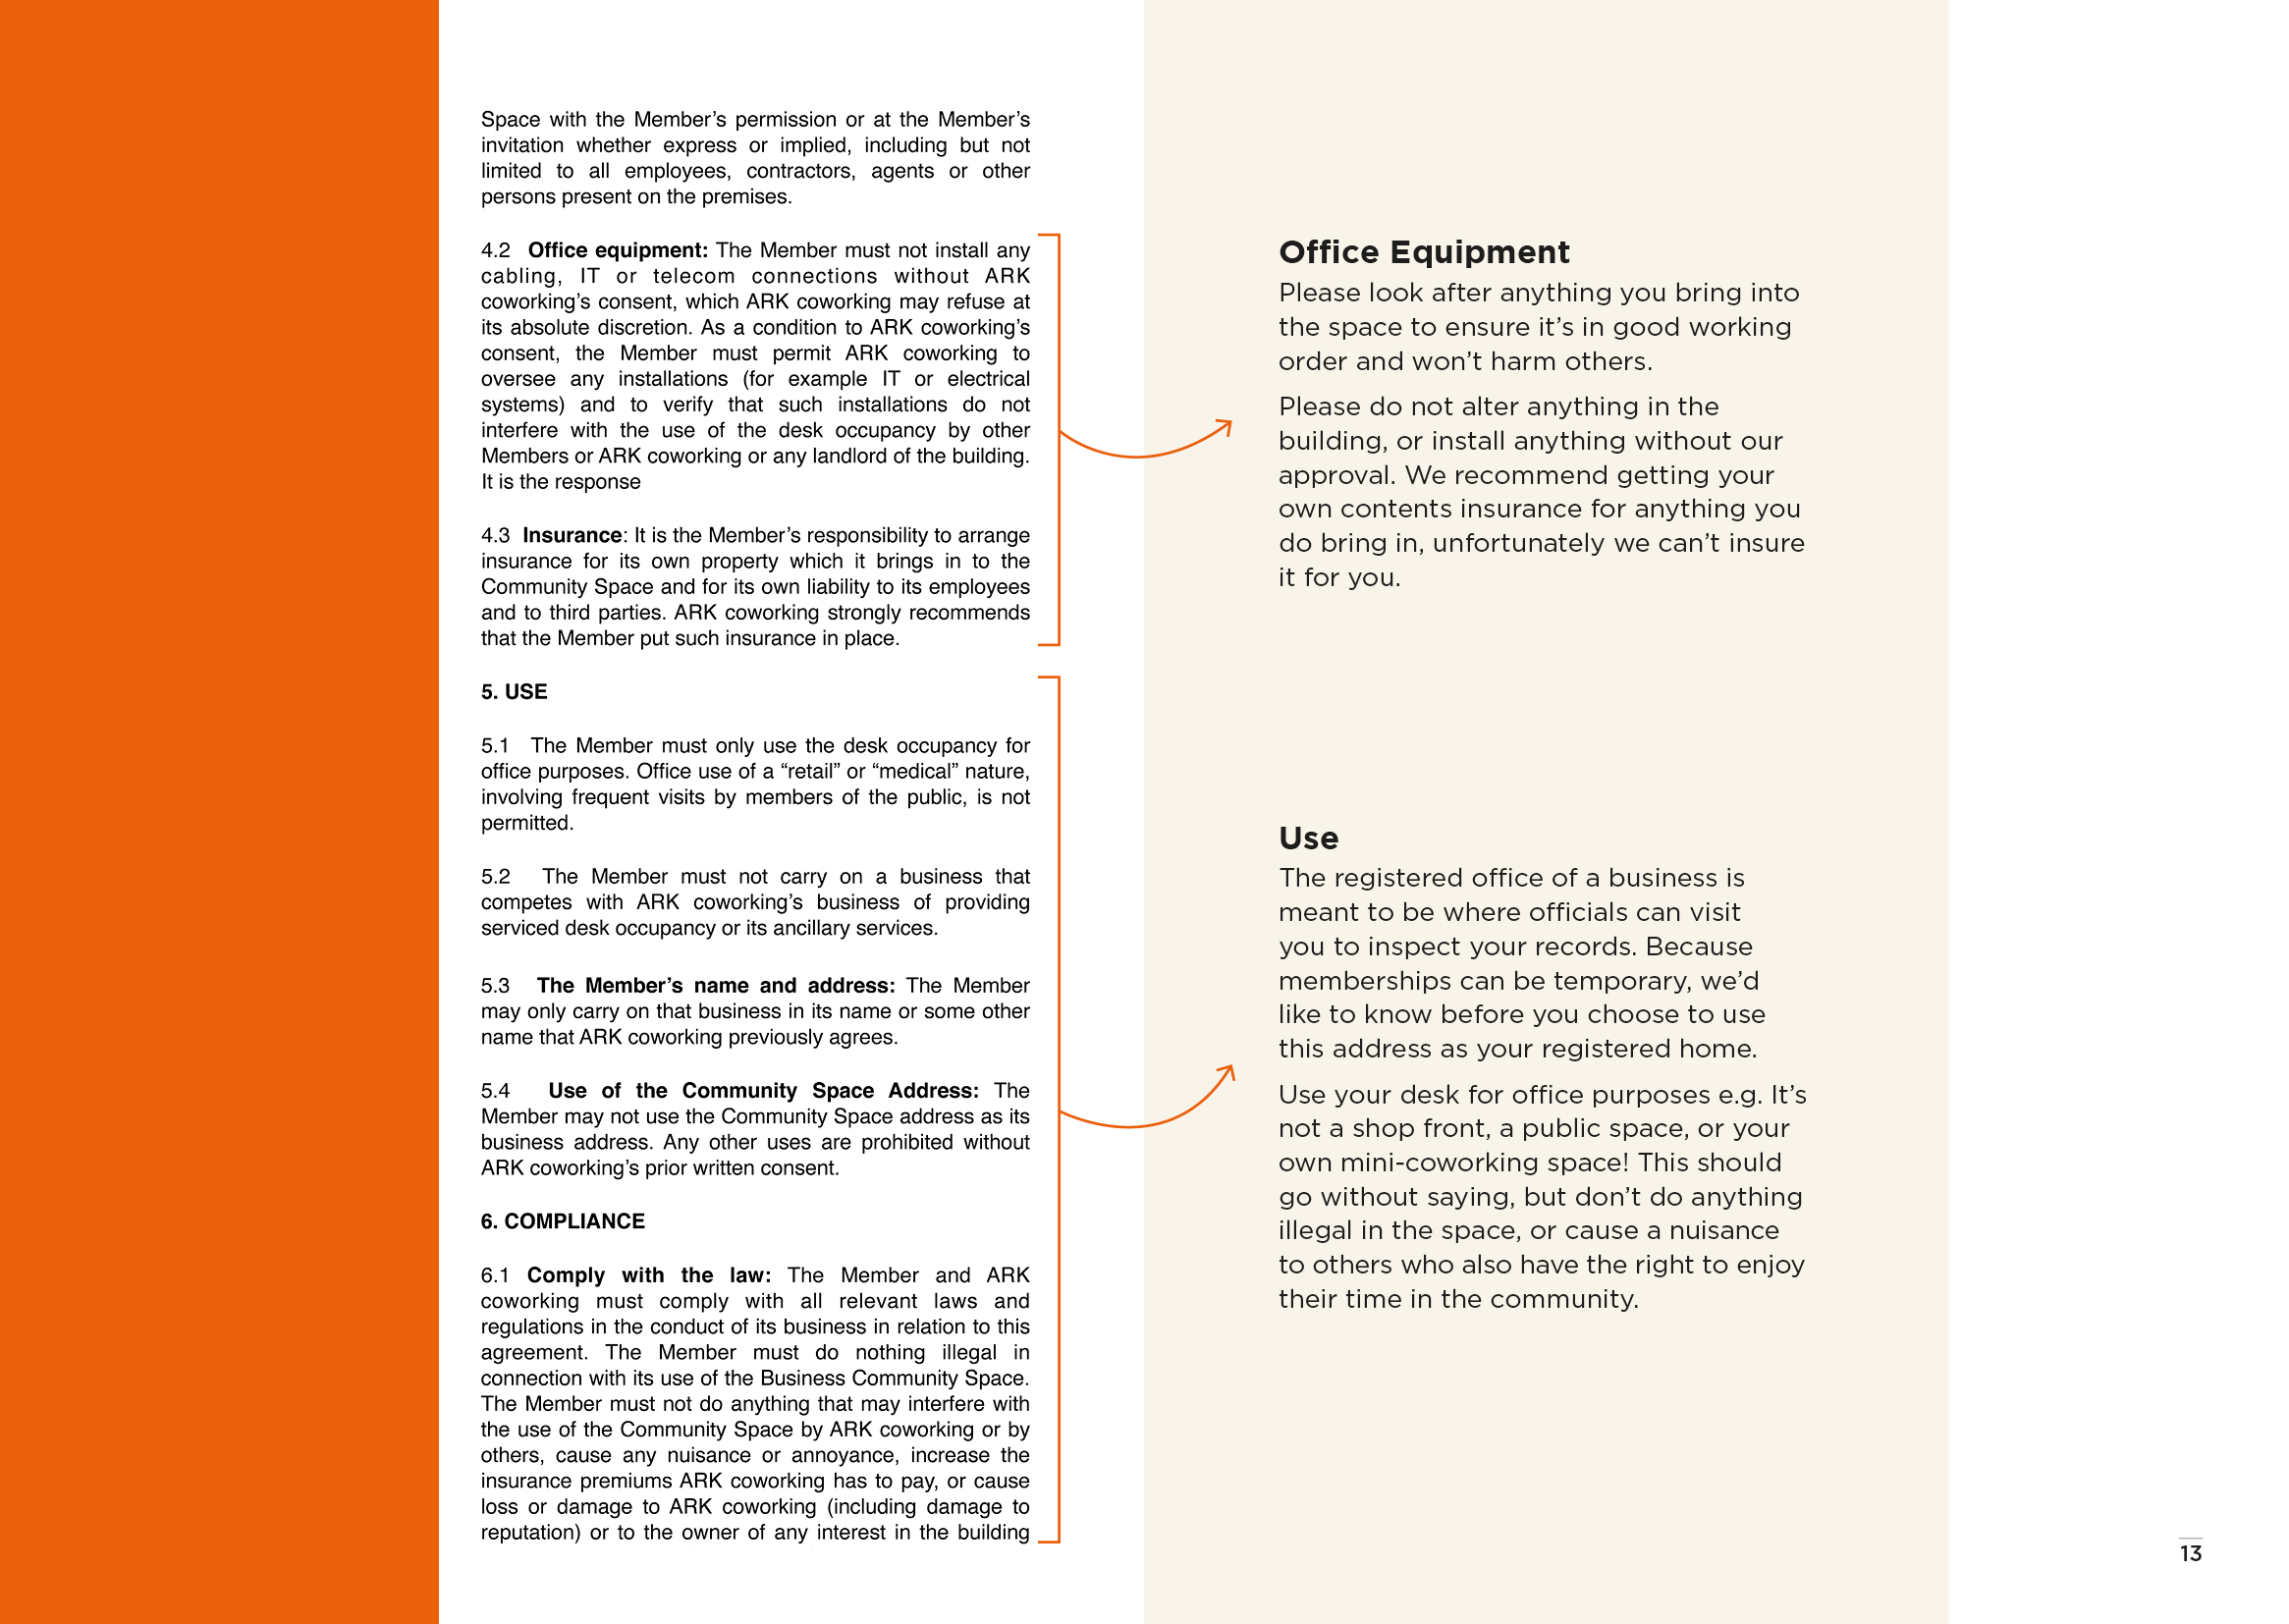 Ts and Cs full booklet7.png